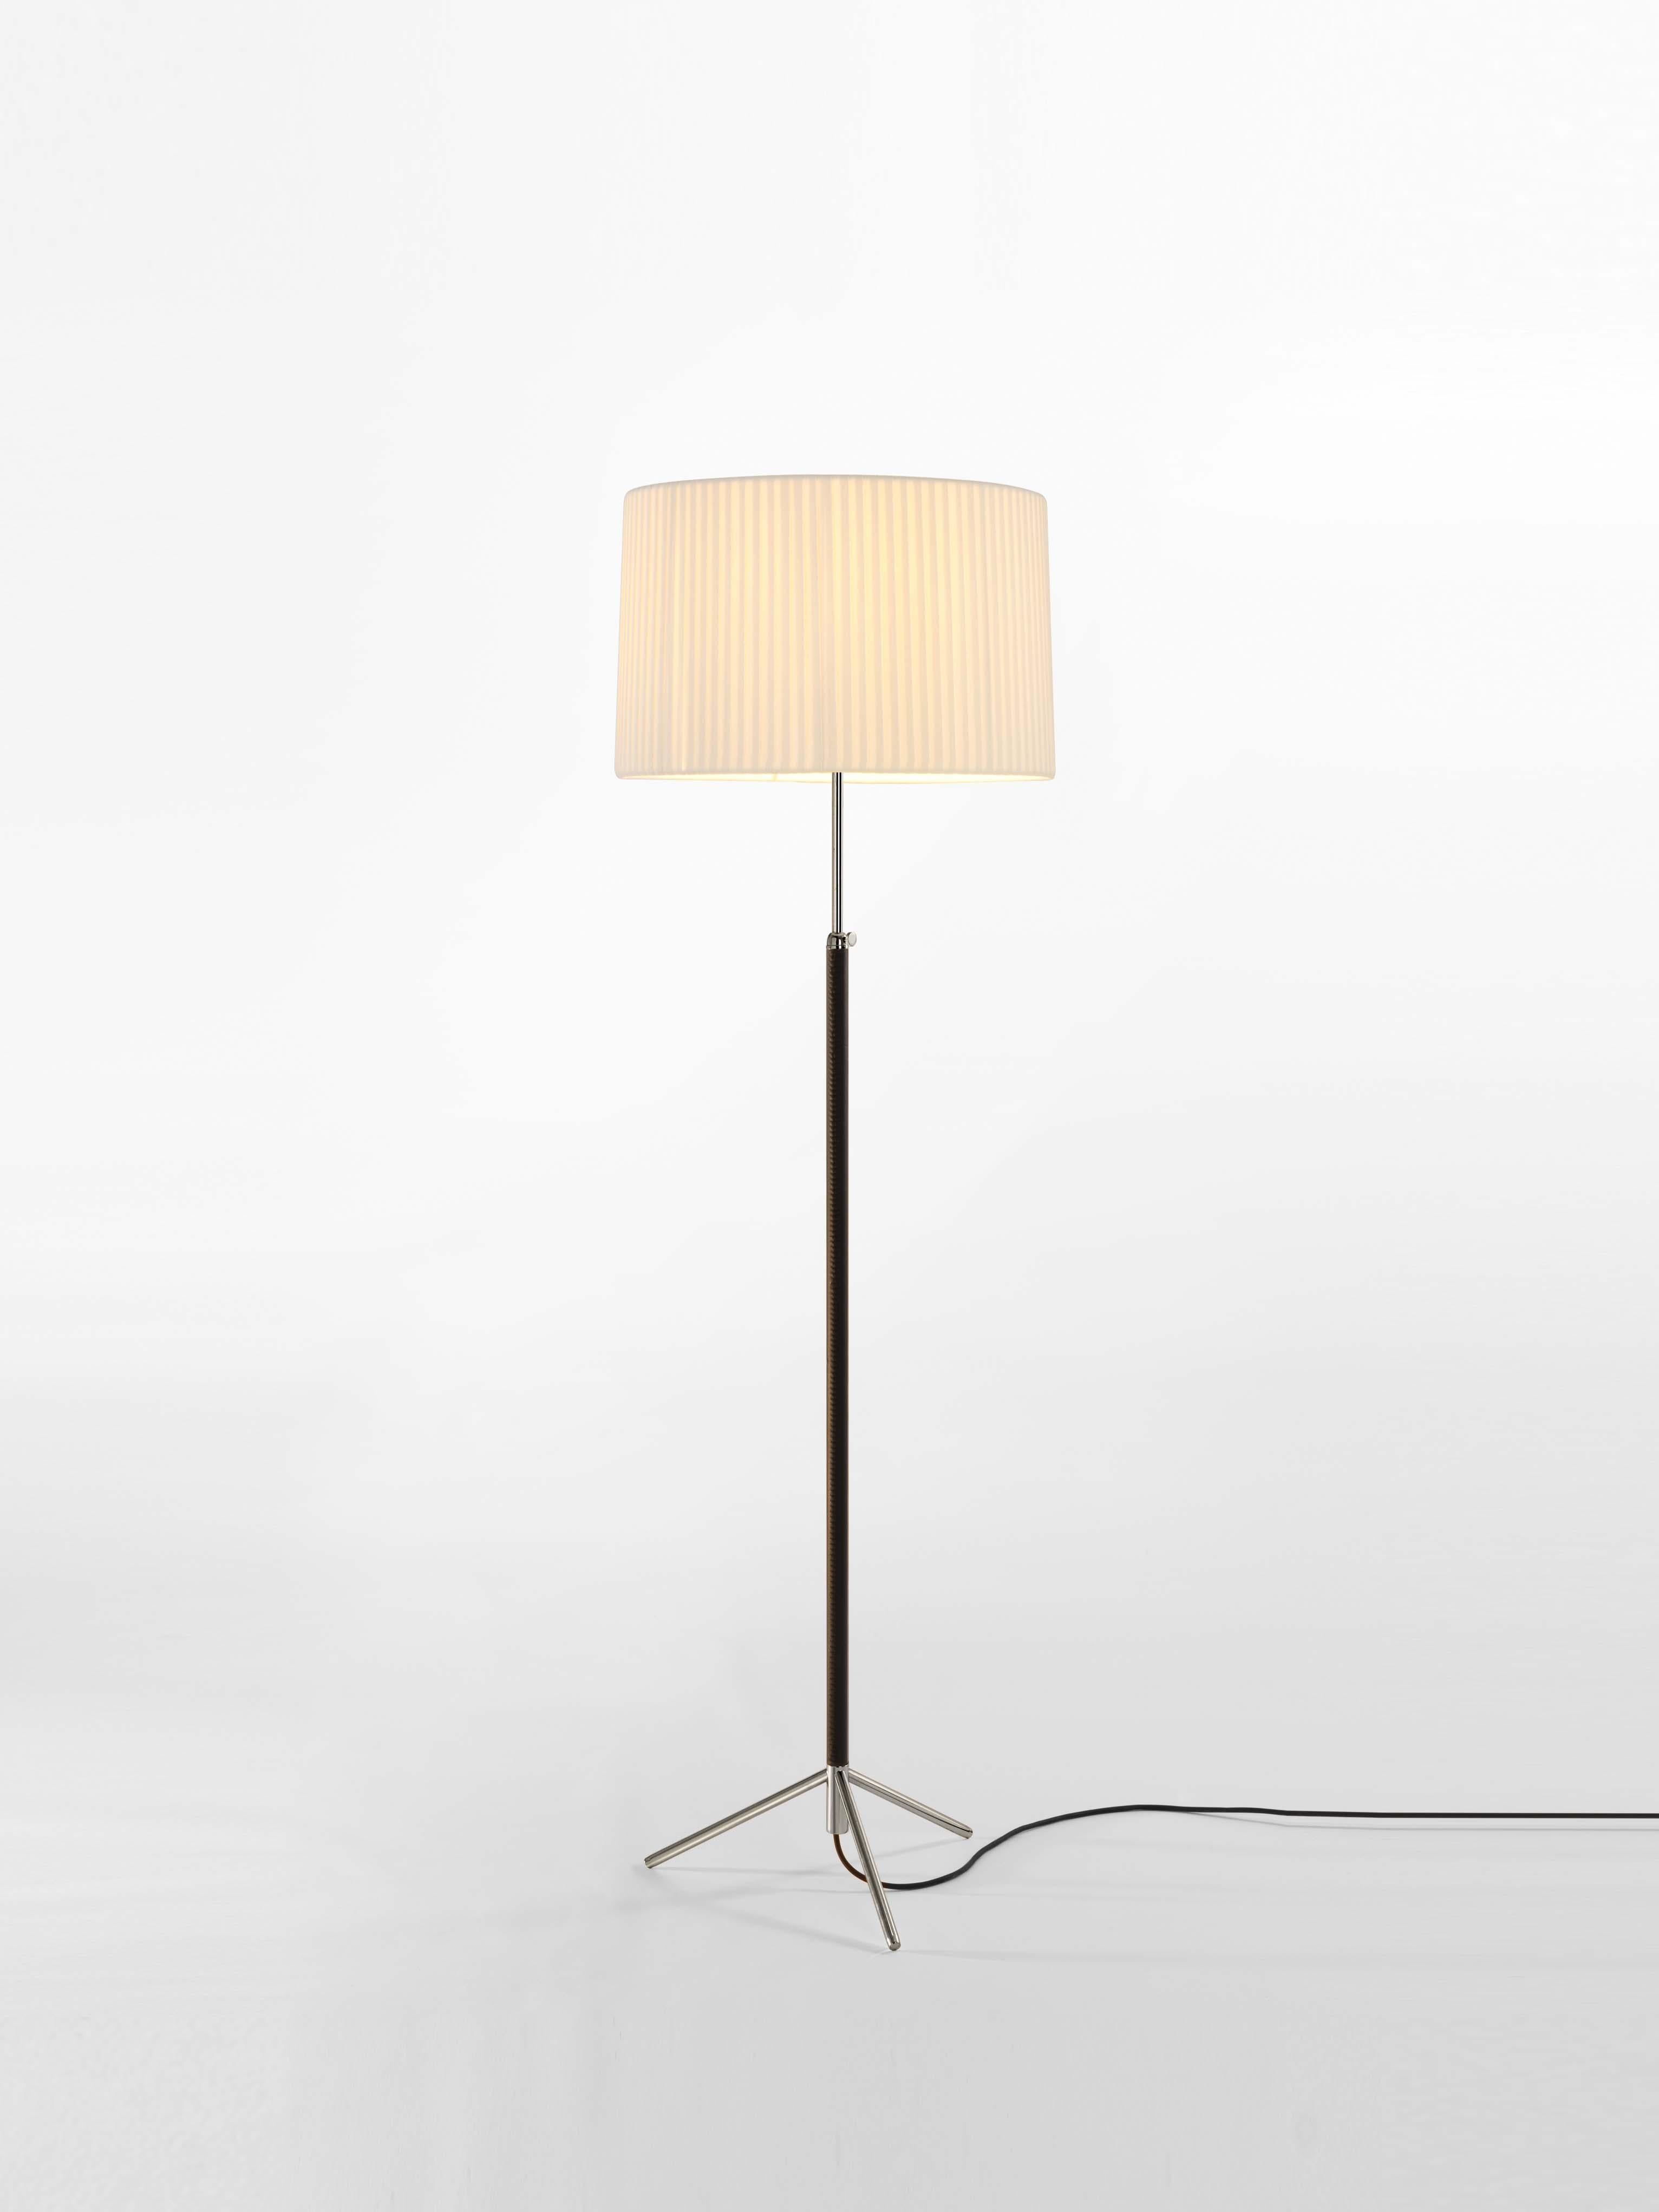 Natural and chrome Pie de Salón G2 floor lamp by Jaume Sans
Dimensions: D 45 x H 120-160 cm
Materials: Metal, leather, ribbon.
Available in chrome-plated or polished brass structure.
Available in other shade colors and sizes.

This slender